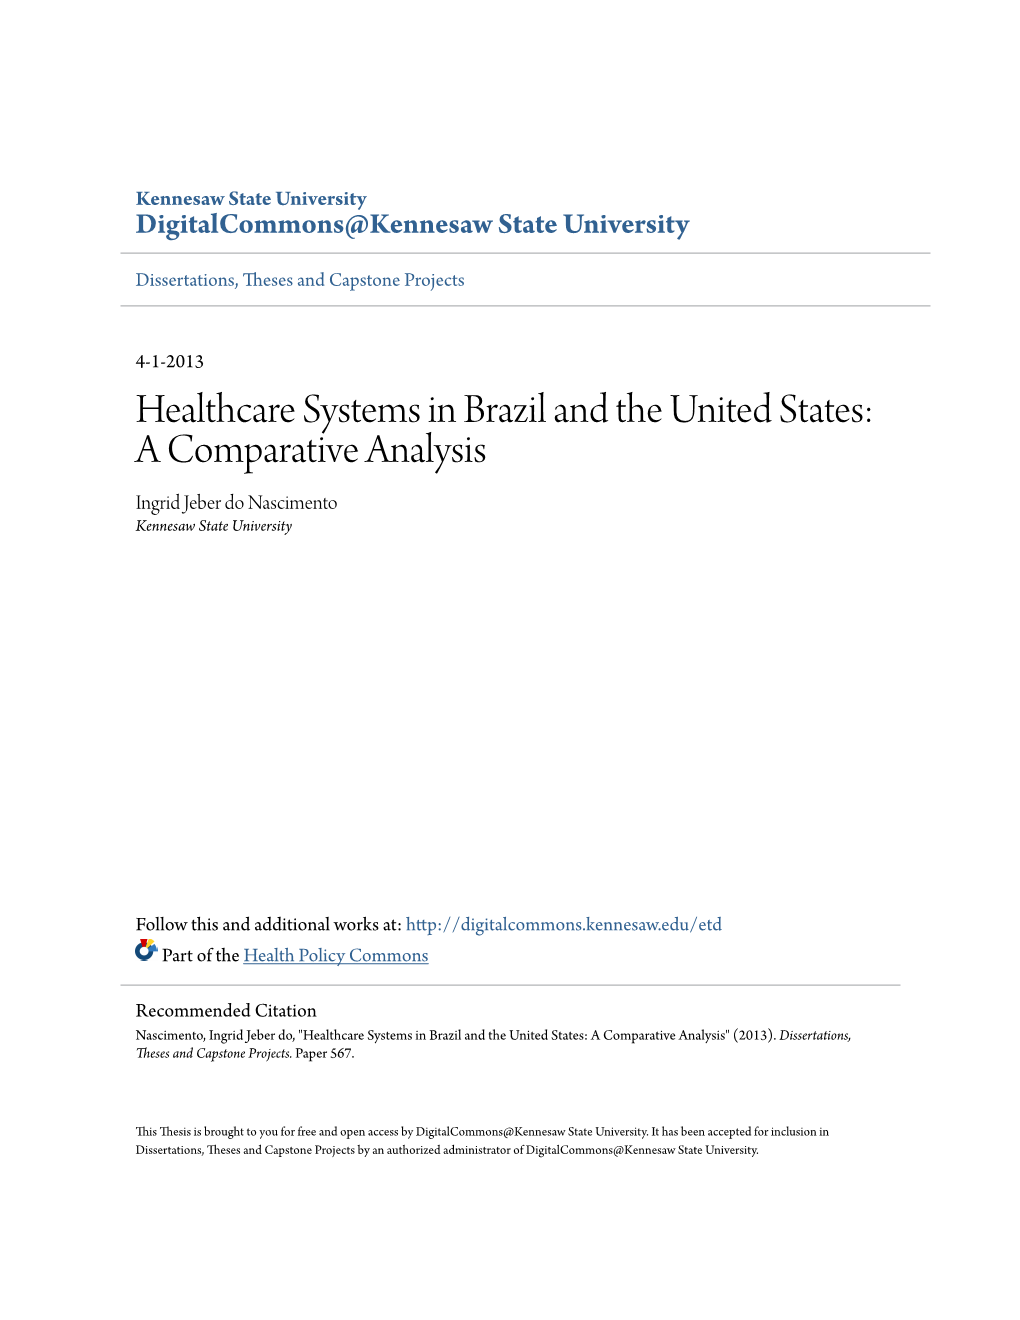 Healthcare Systems in Brazil and the United States: a Comparative Analysis Ingrid Jeber Do Nascimento Kennesaw State University